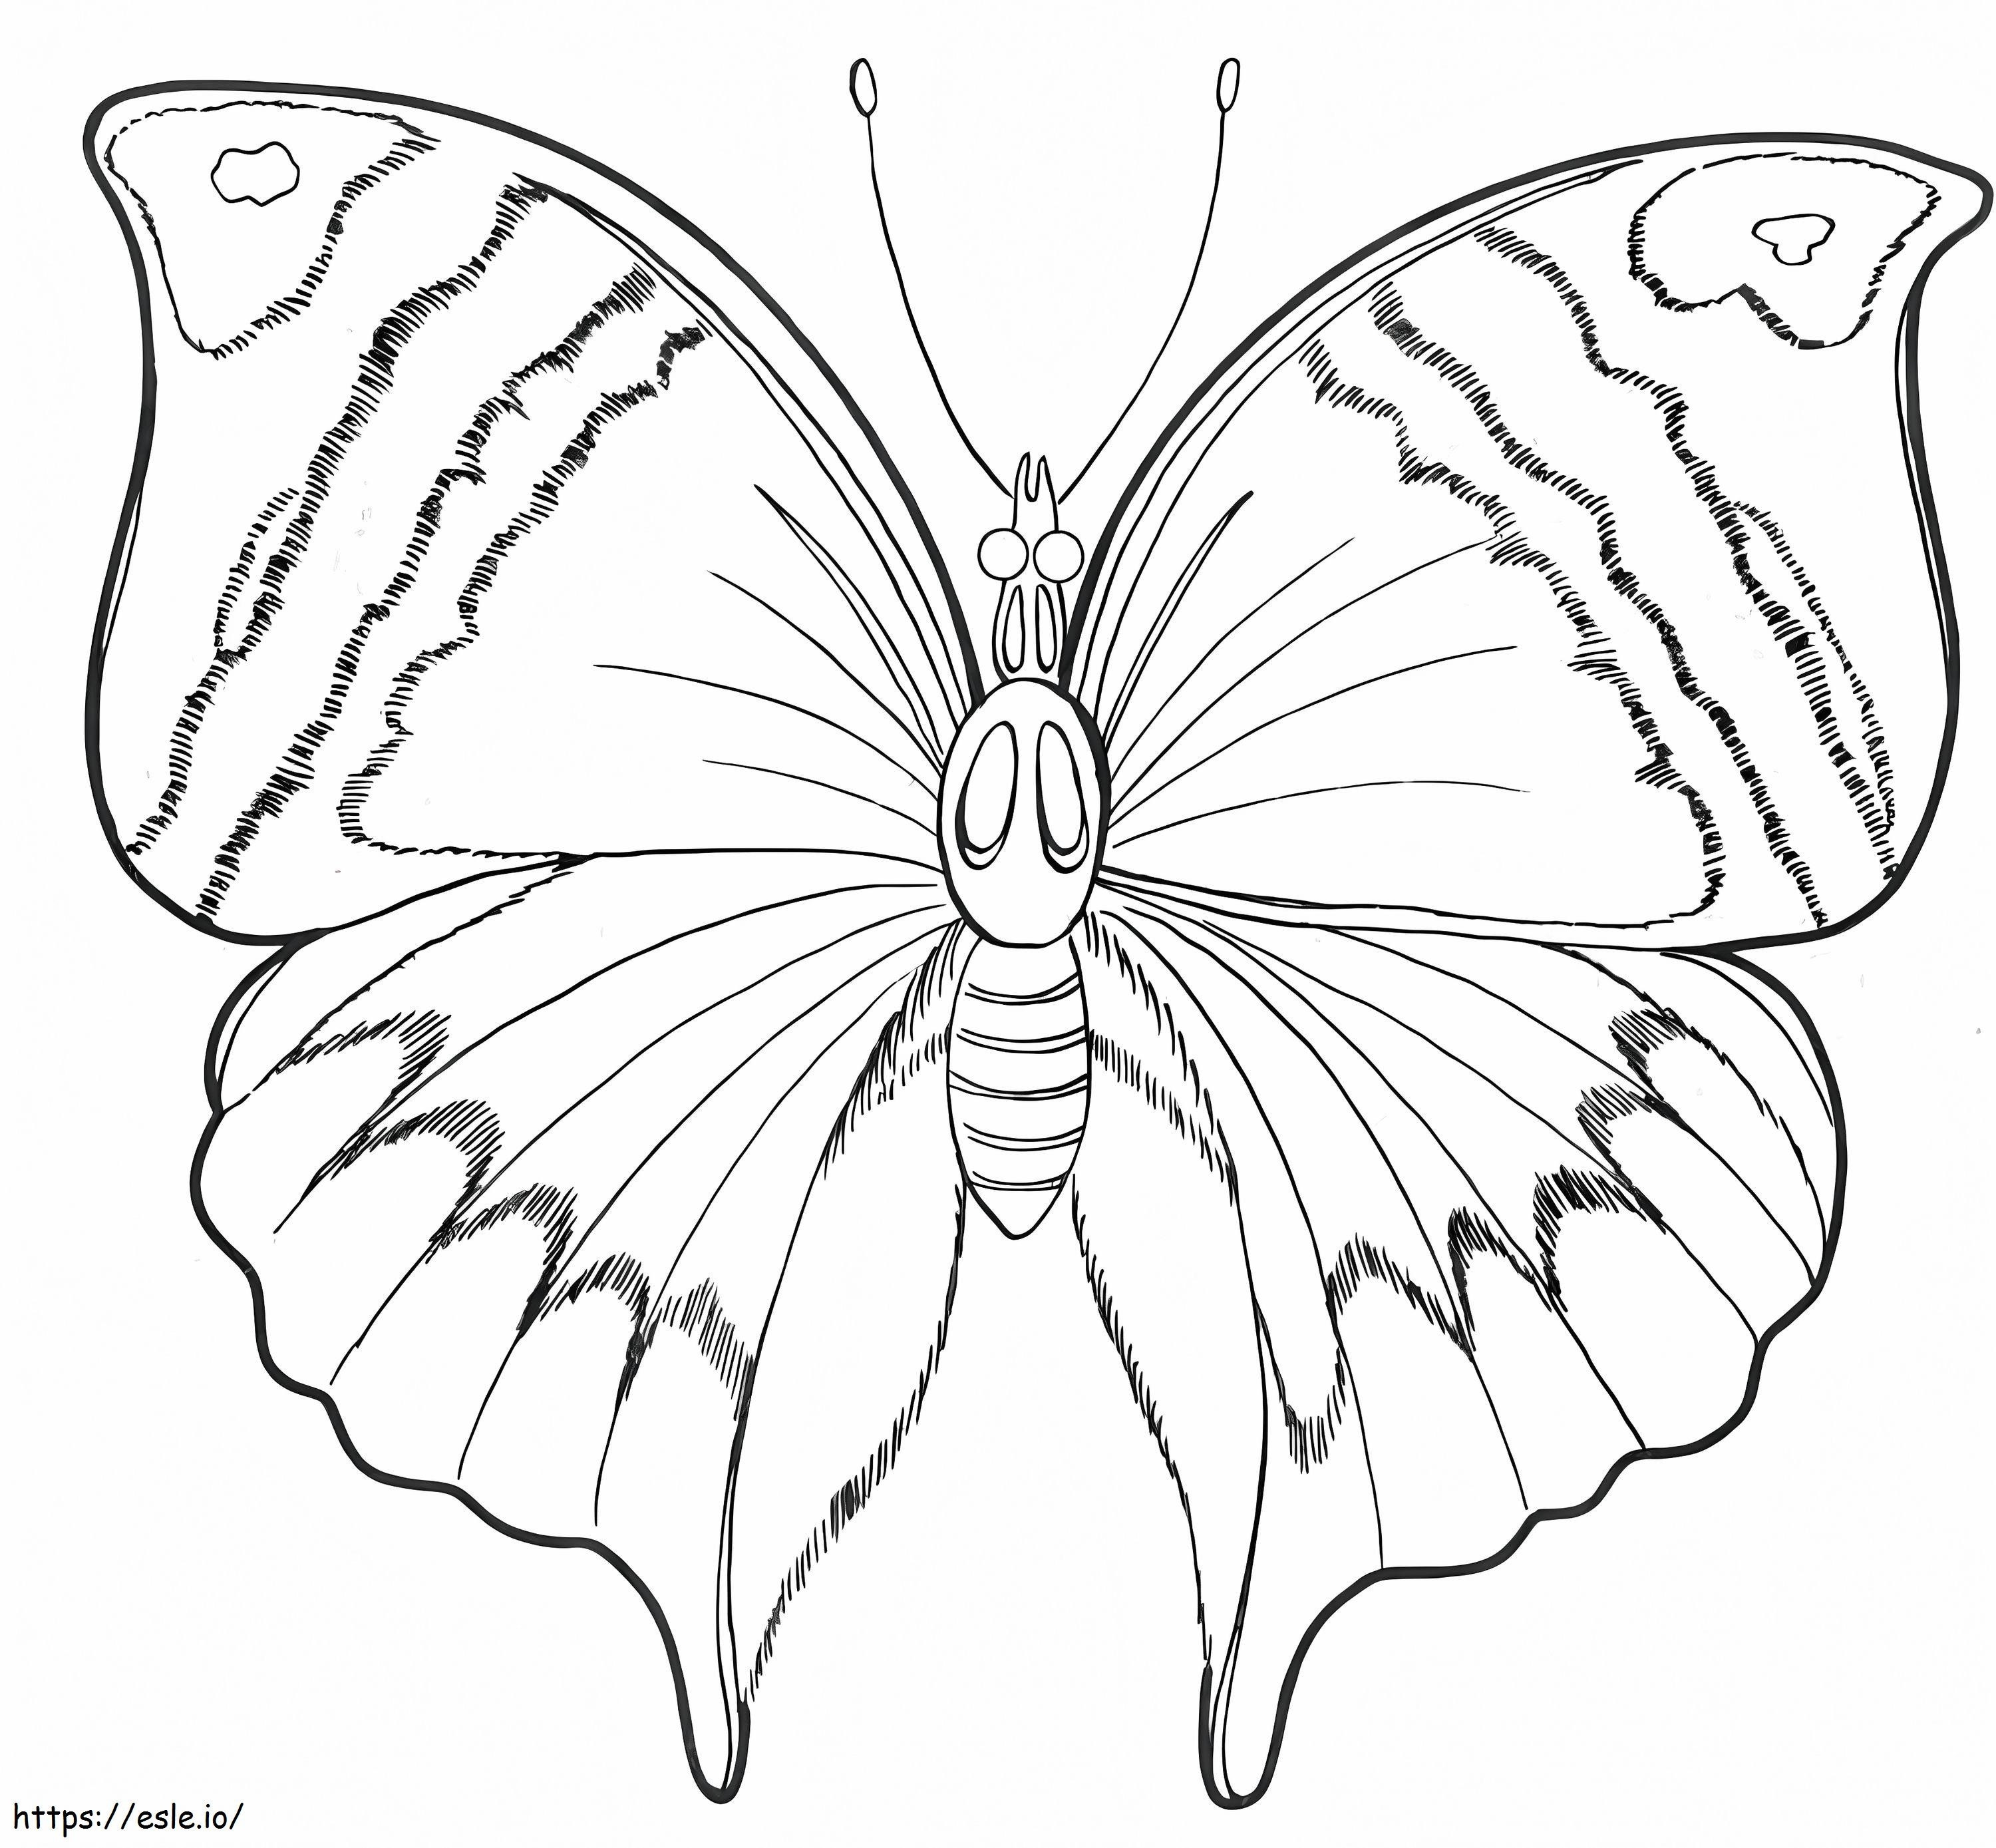 A Normal Butterfly coloring page